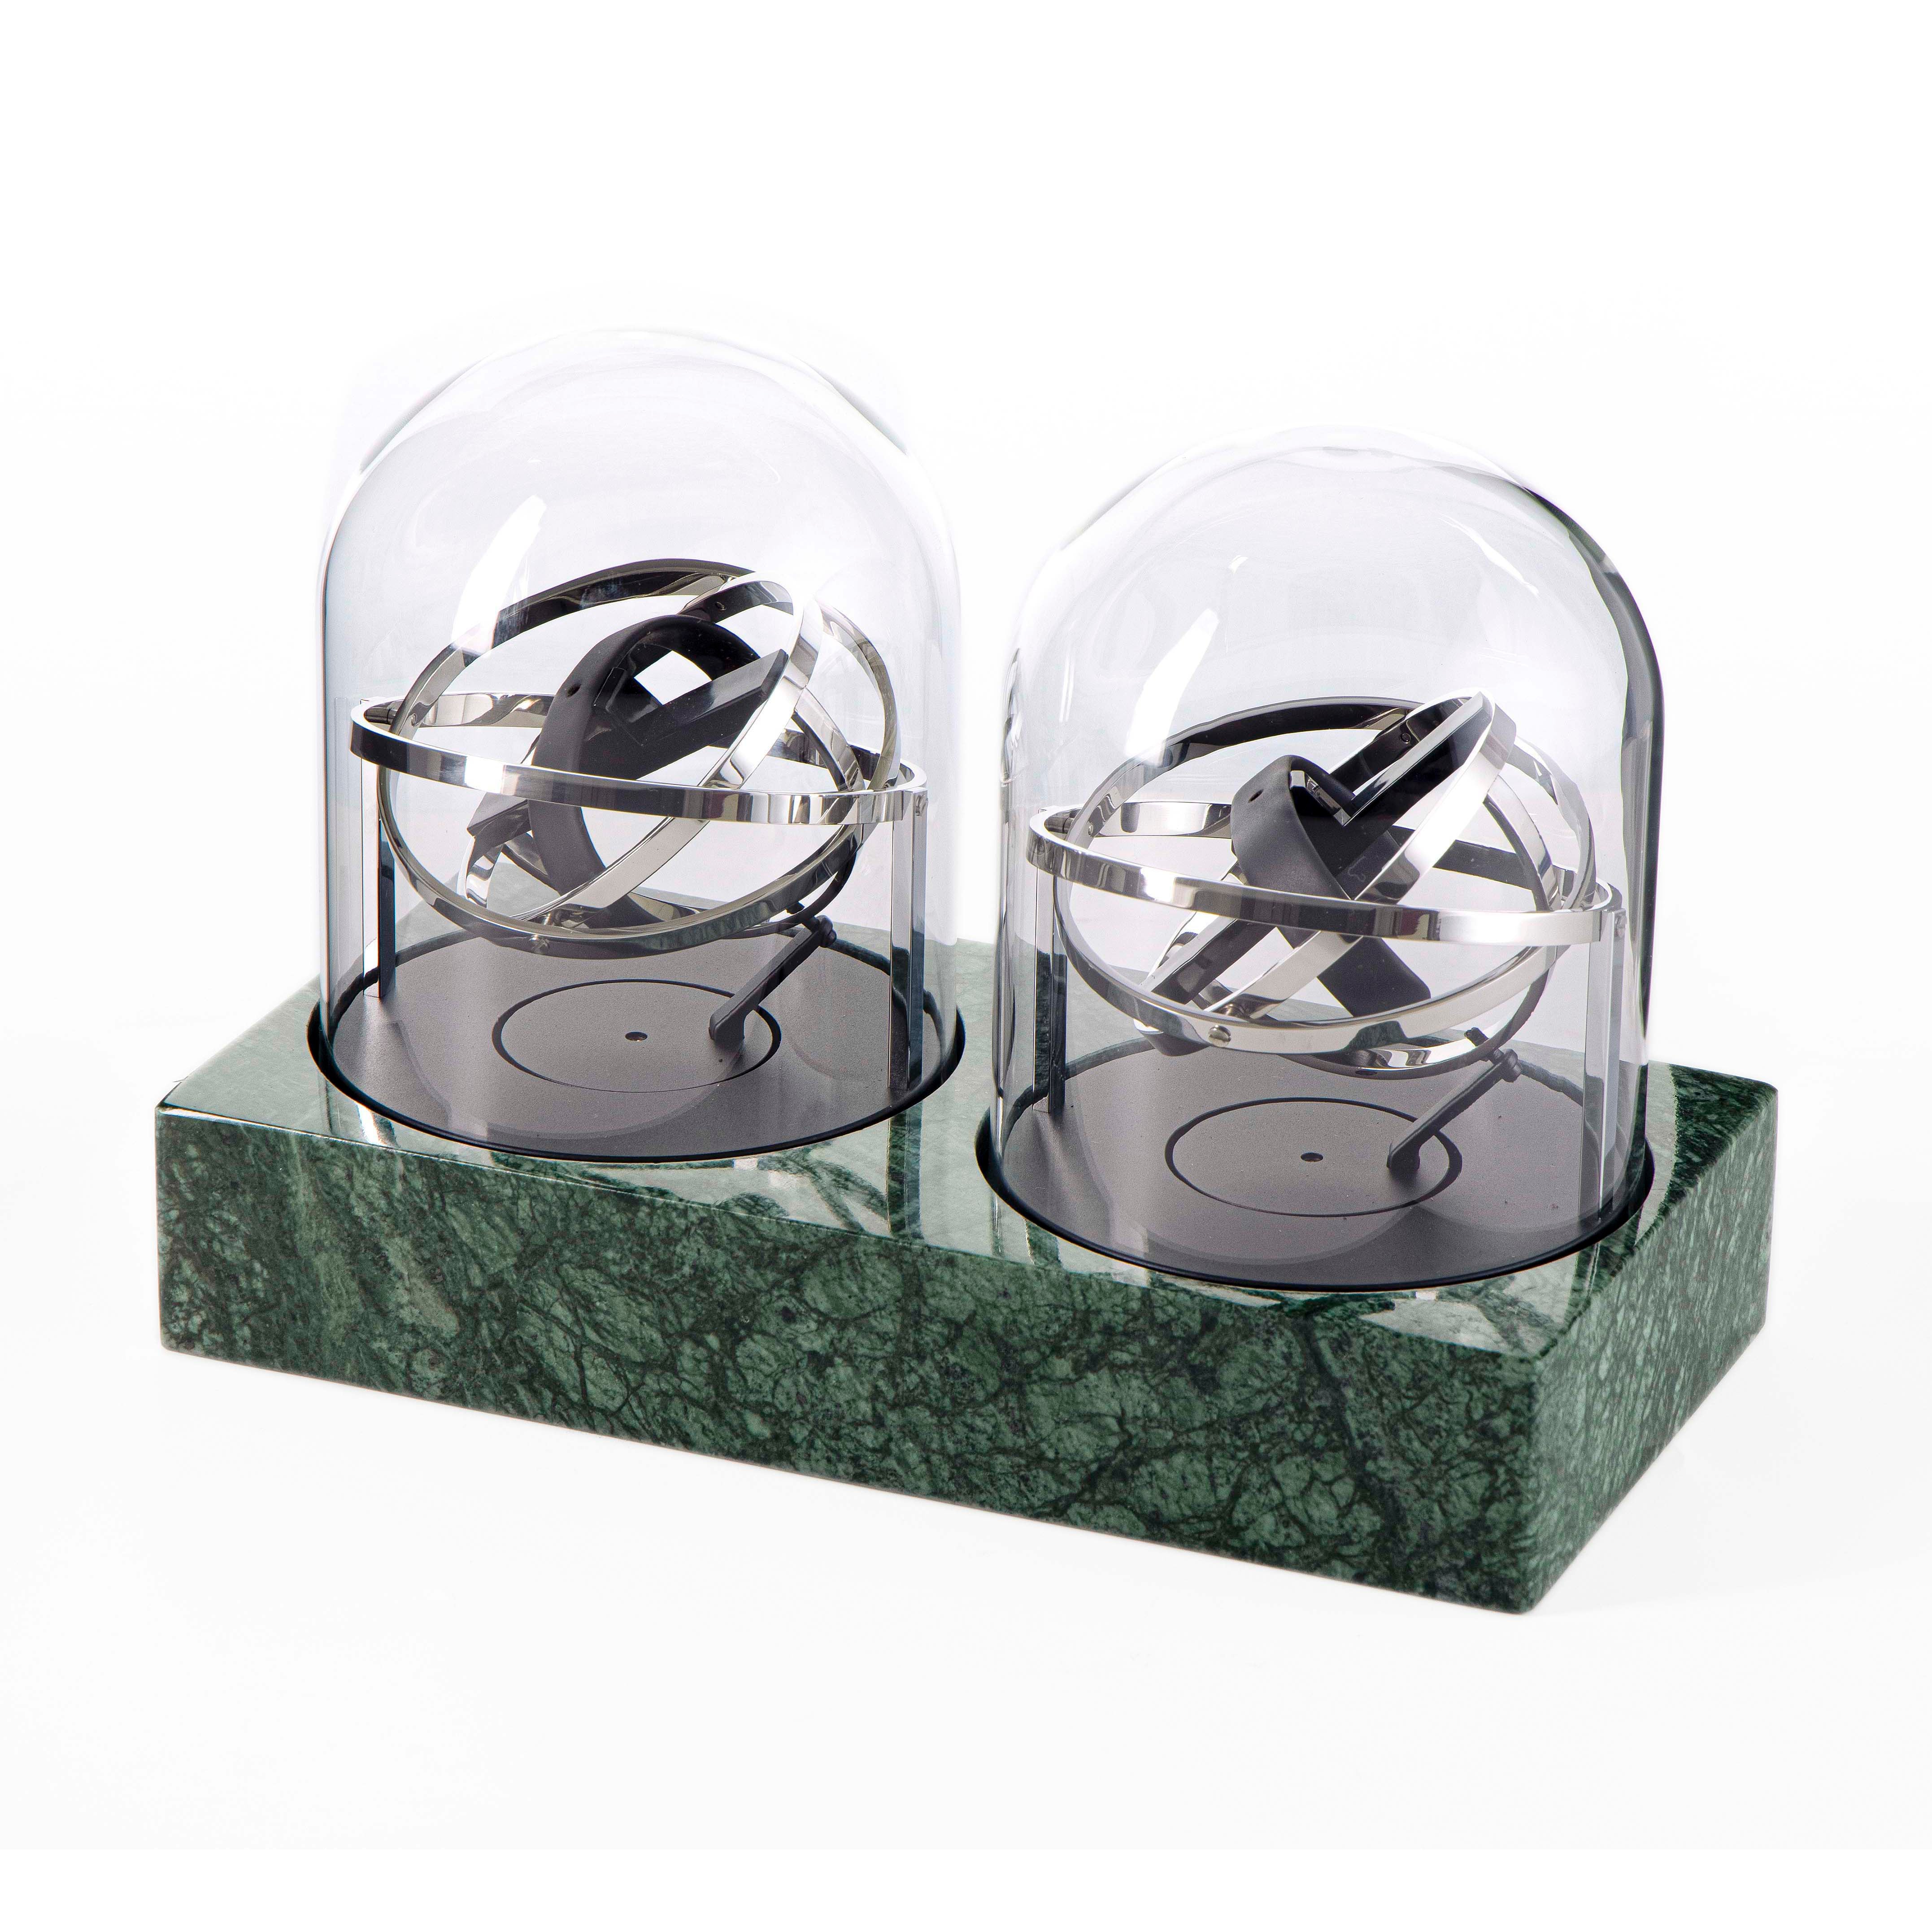 Double Watch Winder - Astronomia X1 Silver - Green Marble Edition